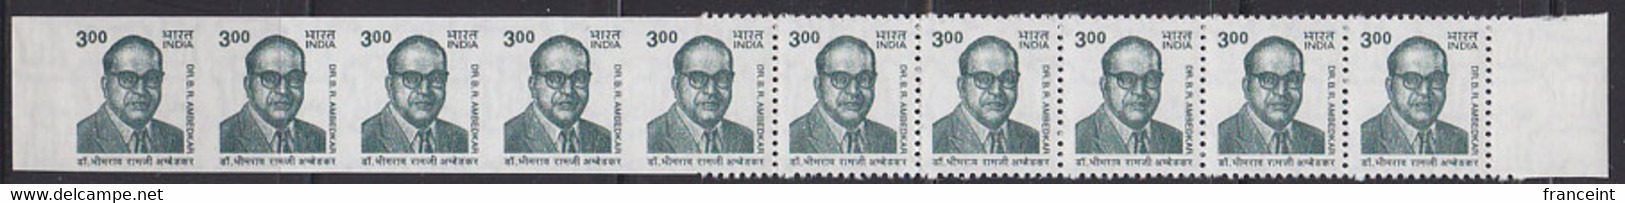 INDIA(2001) B.R. Ambedkar. Strip Of 10 With Left 4 Stamps Totally Imperf And 5th Stamp Imperf On Left. Scott No 1872. - Plaatfouten En Curiosa